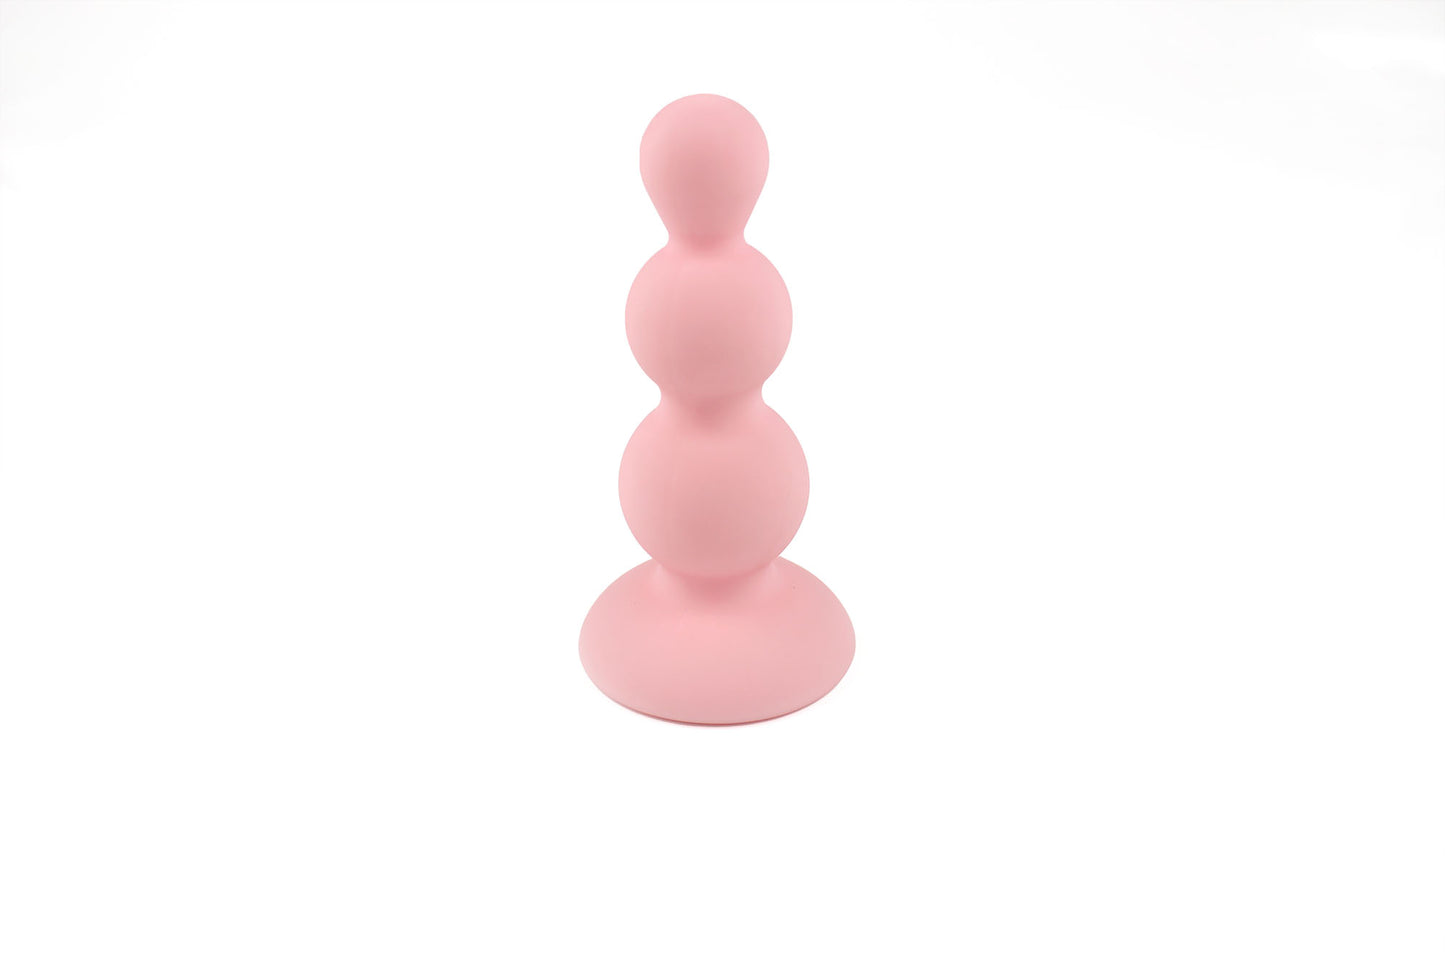 Peach pink beaded gem butt plug stood upright on its base on a white background